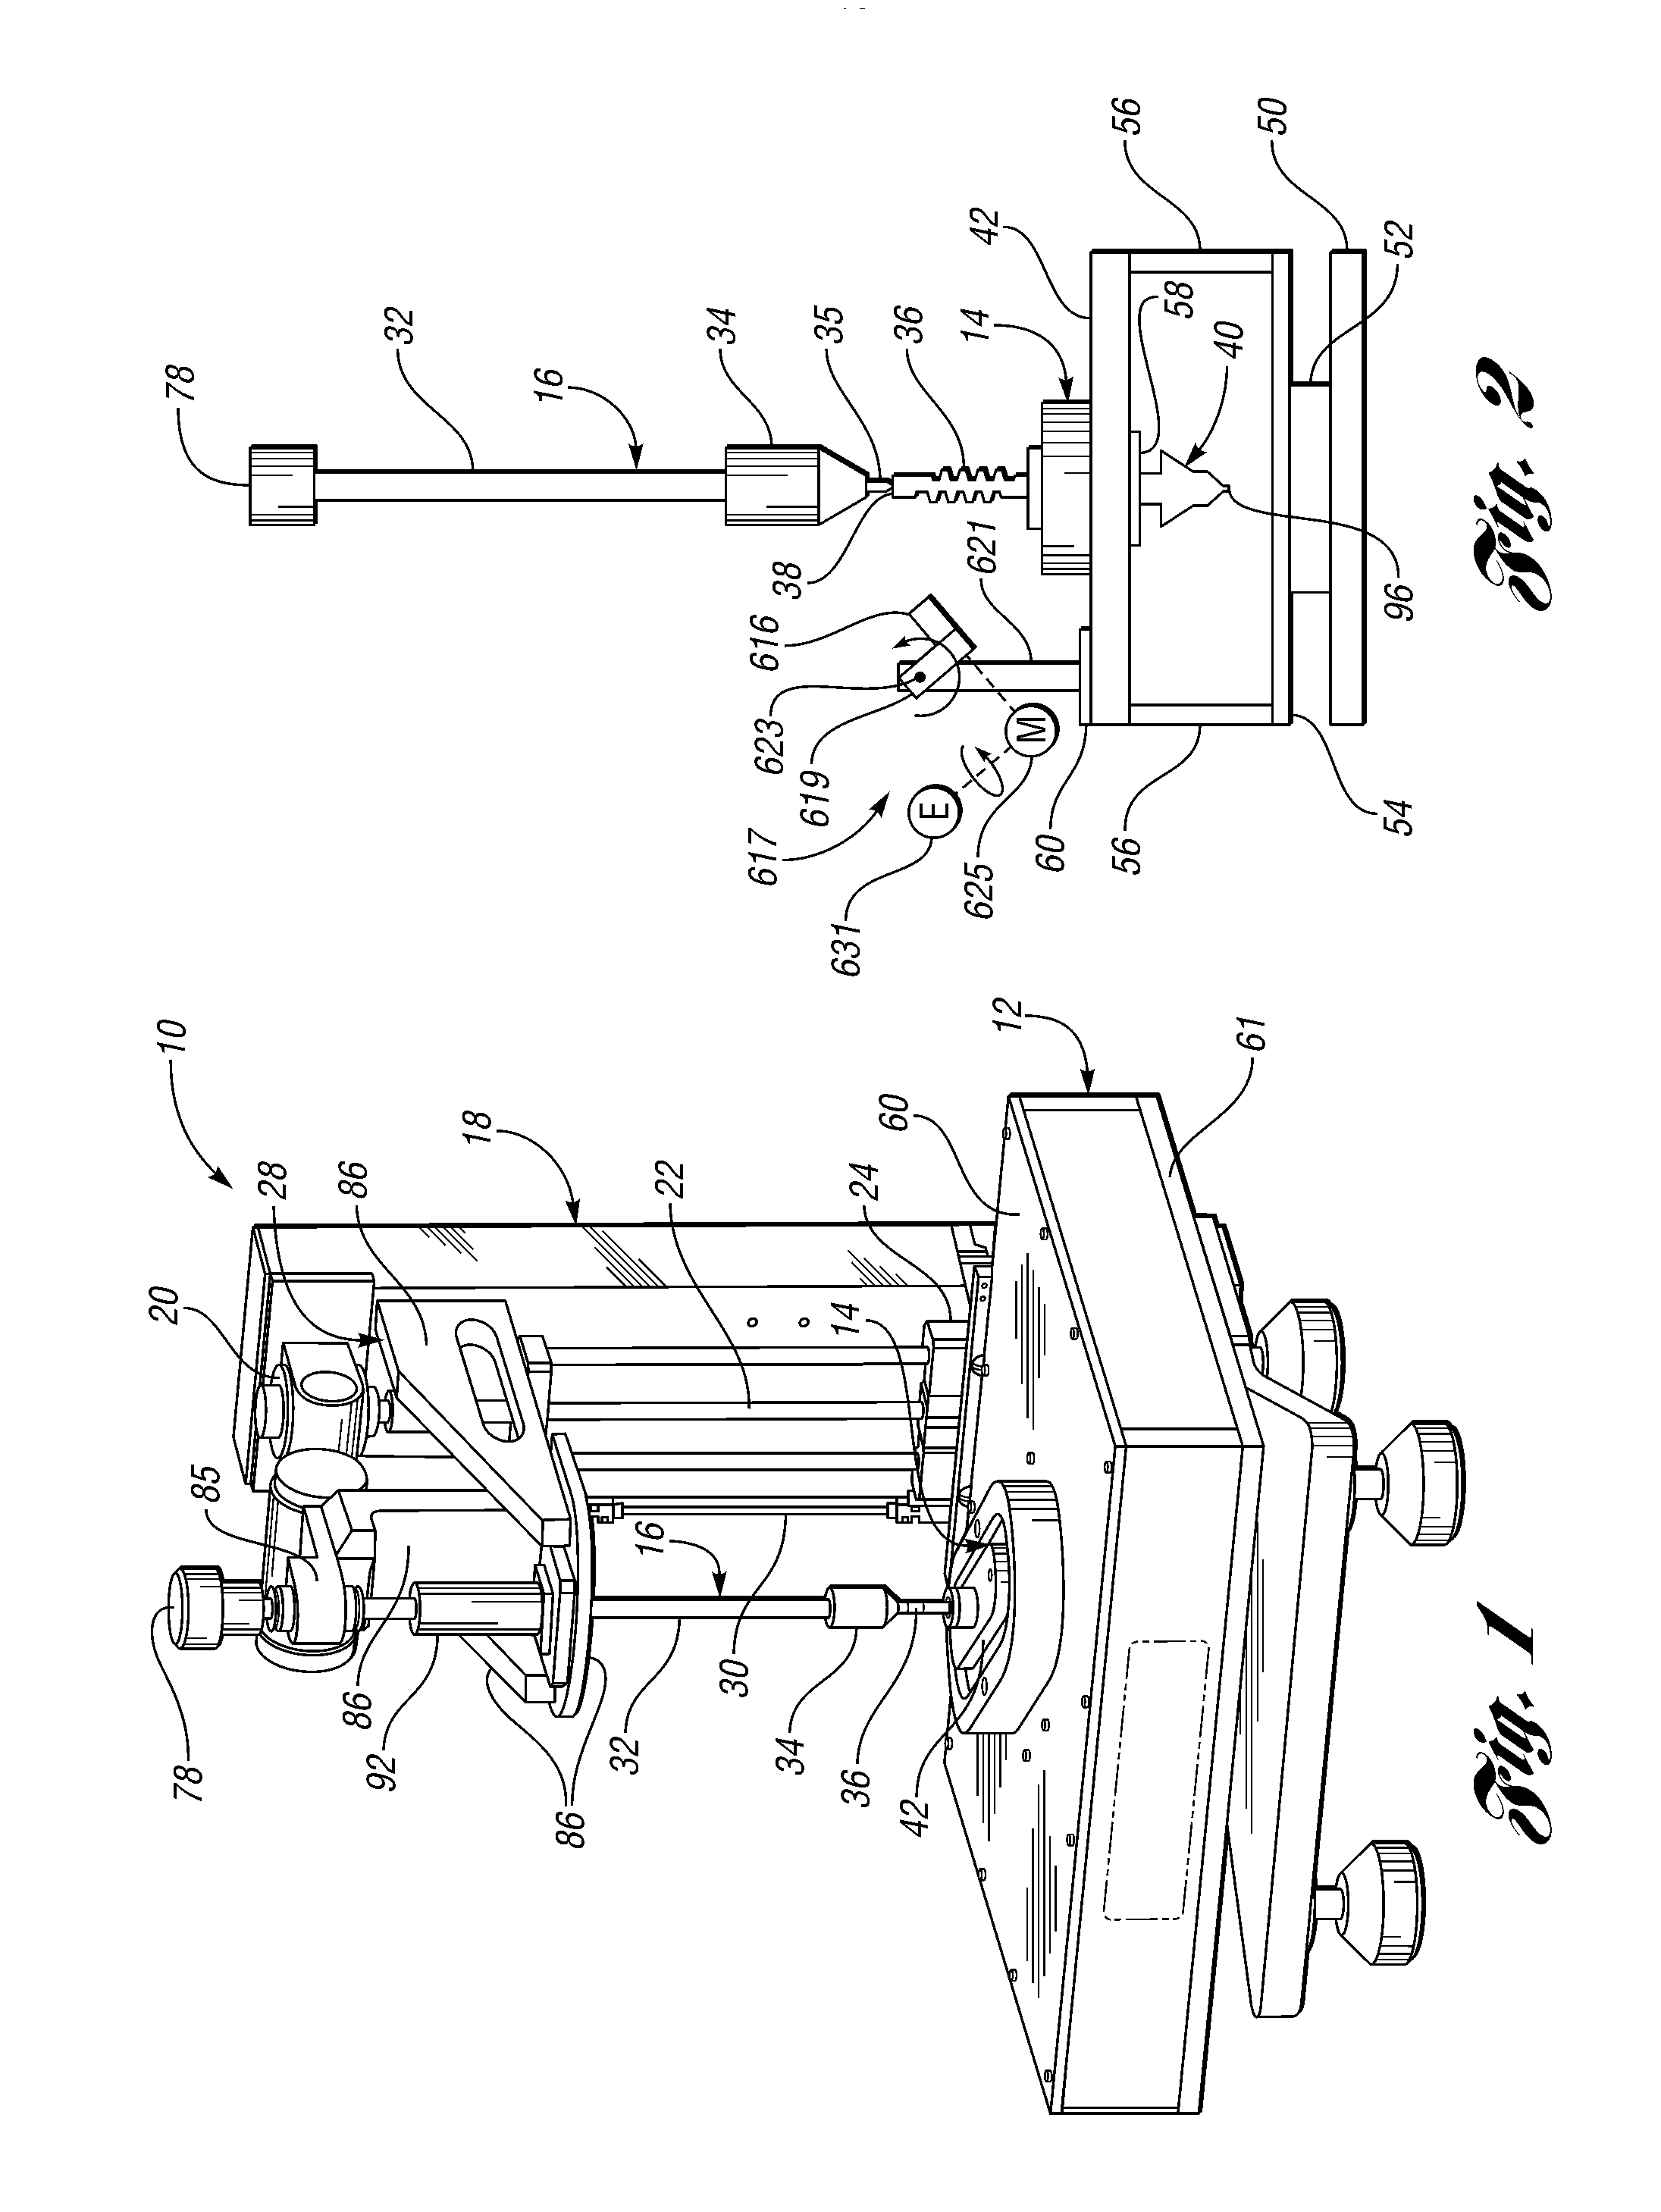 Method For Precisely Measuring Position Of A Part To Be Inspected At A Part Inspection Station